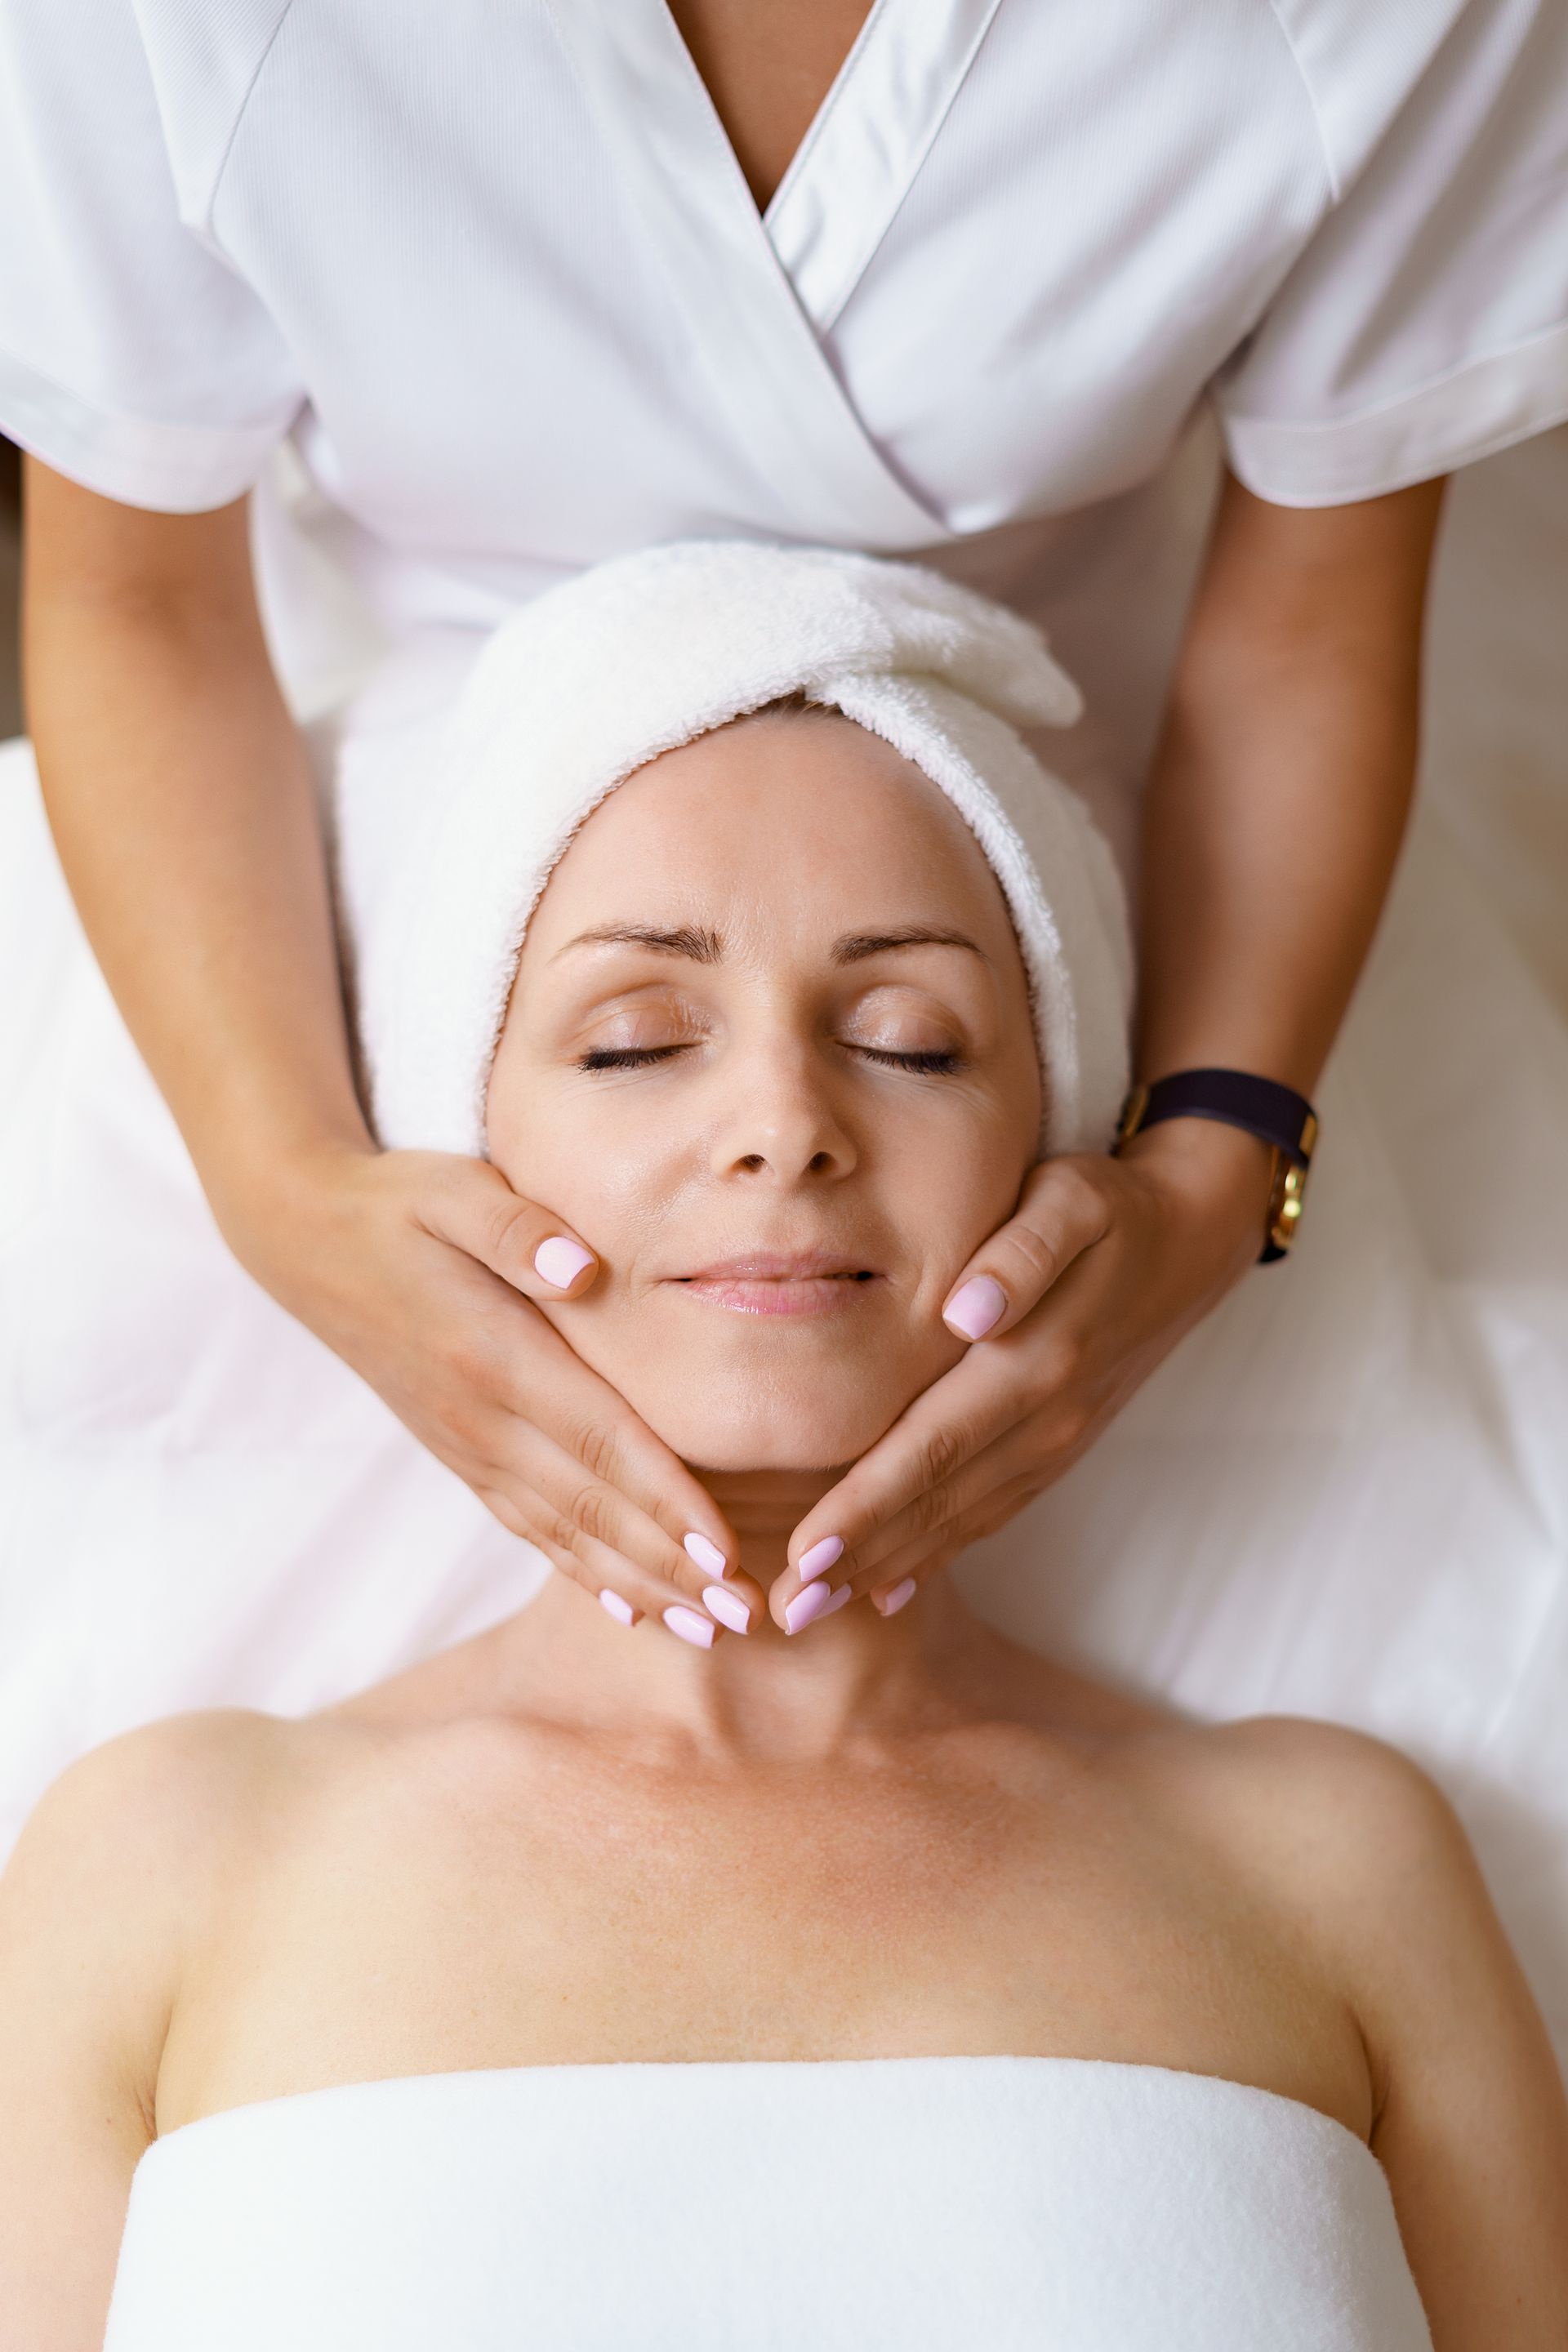 a woman with a towel wrapped around her head is getting a facial massage at a spa .